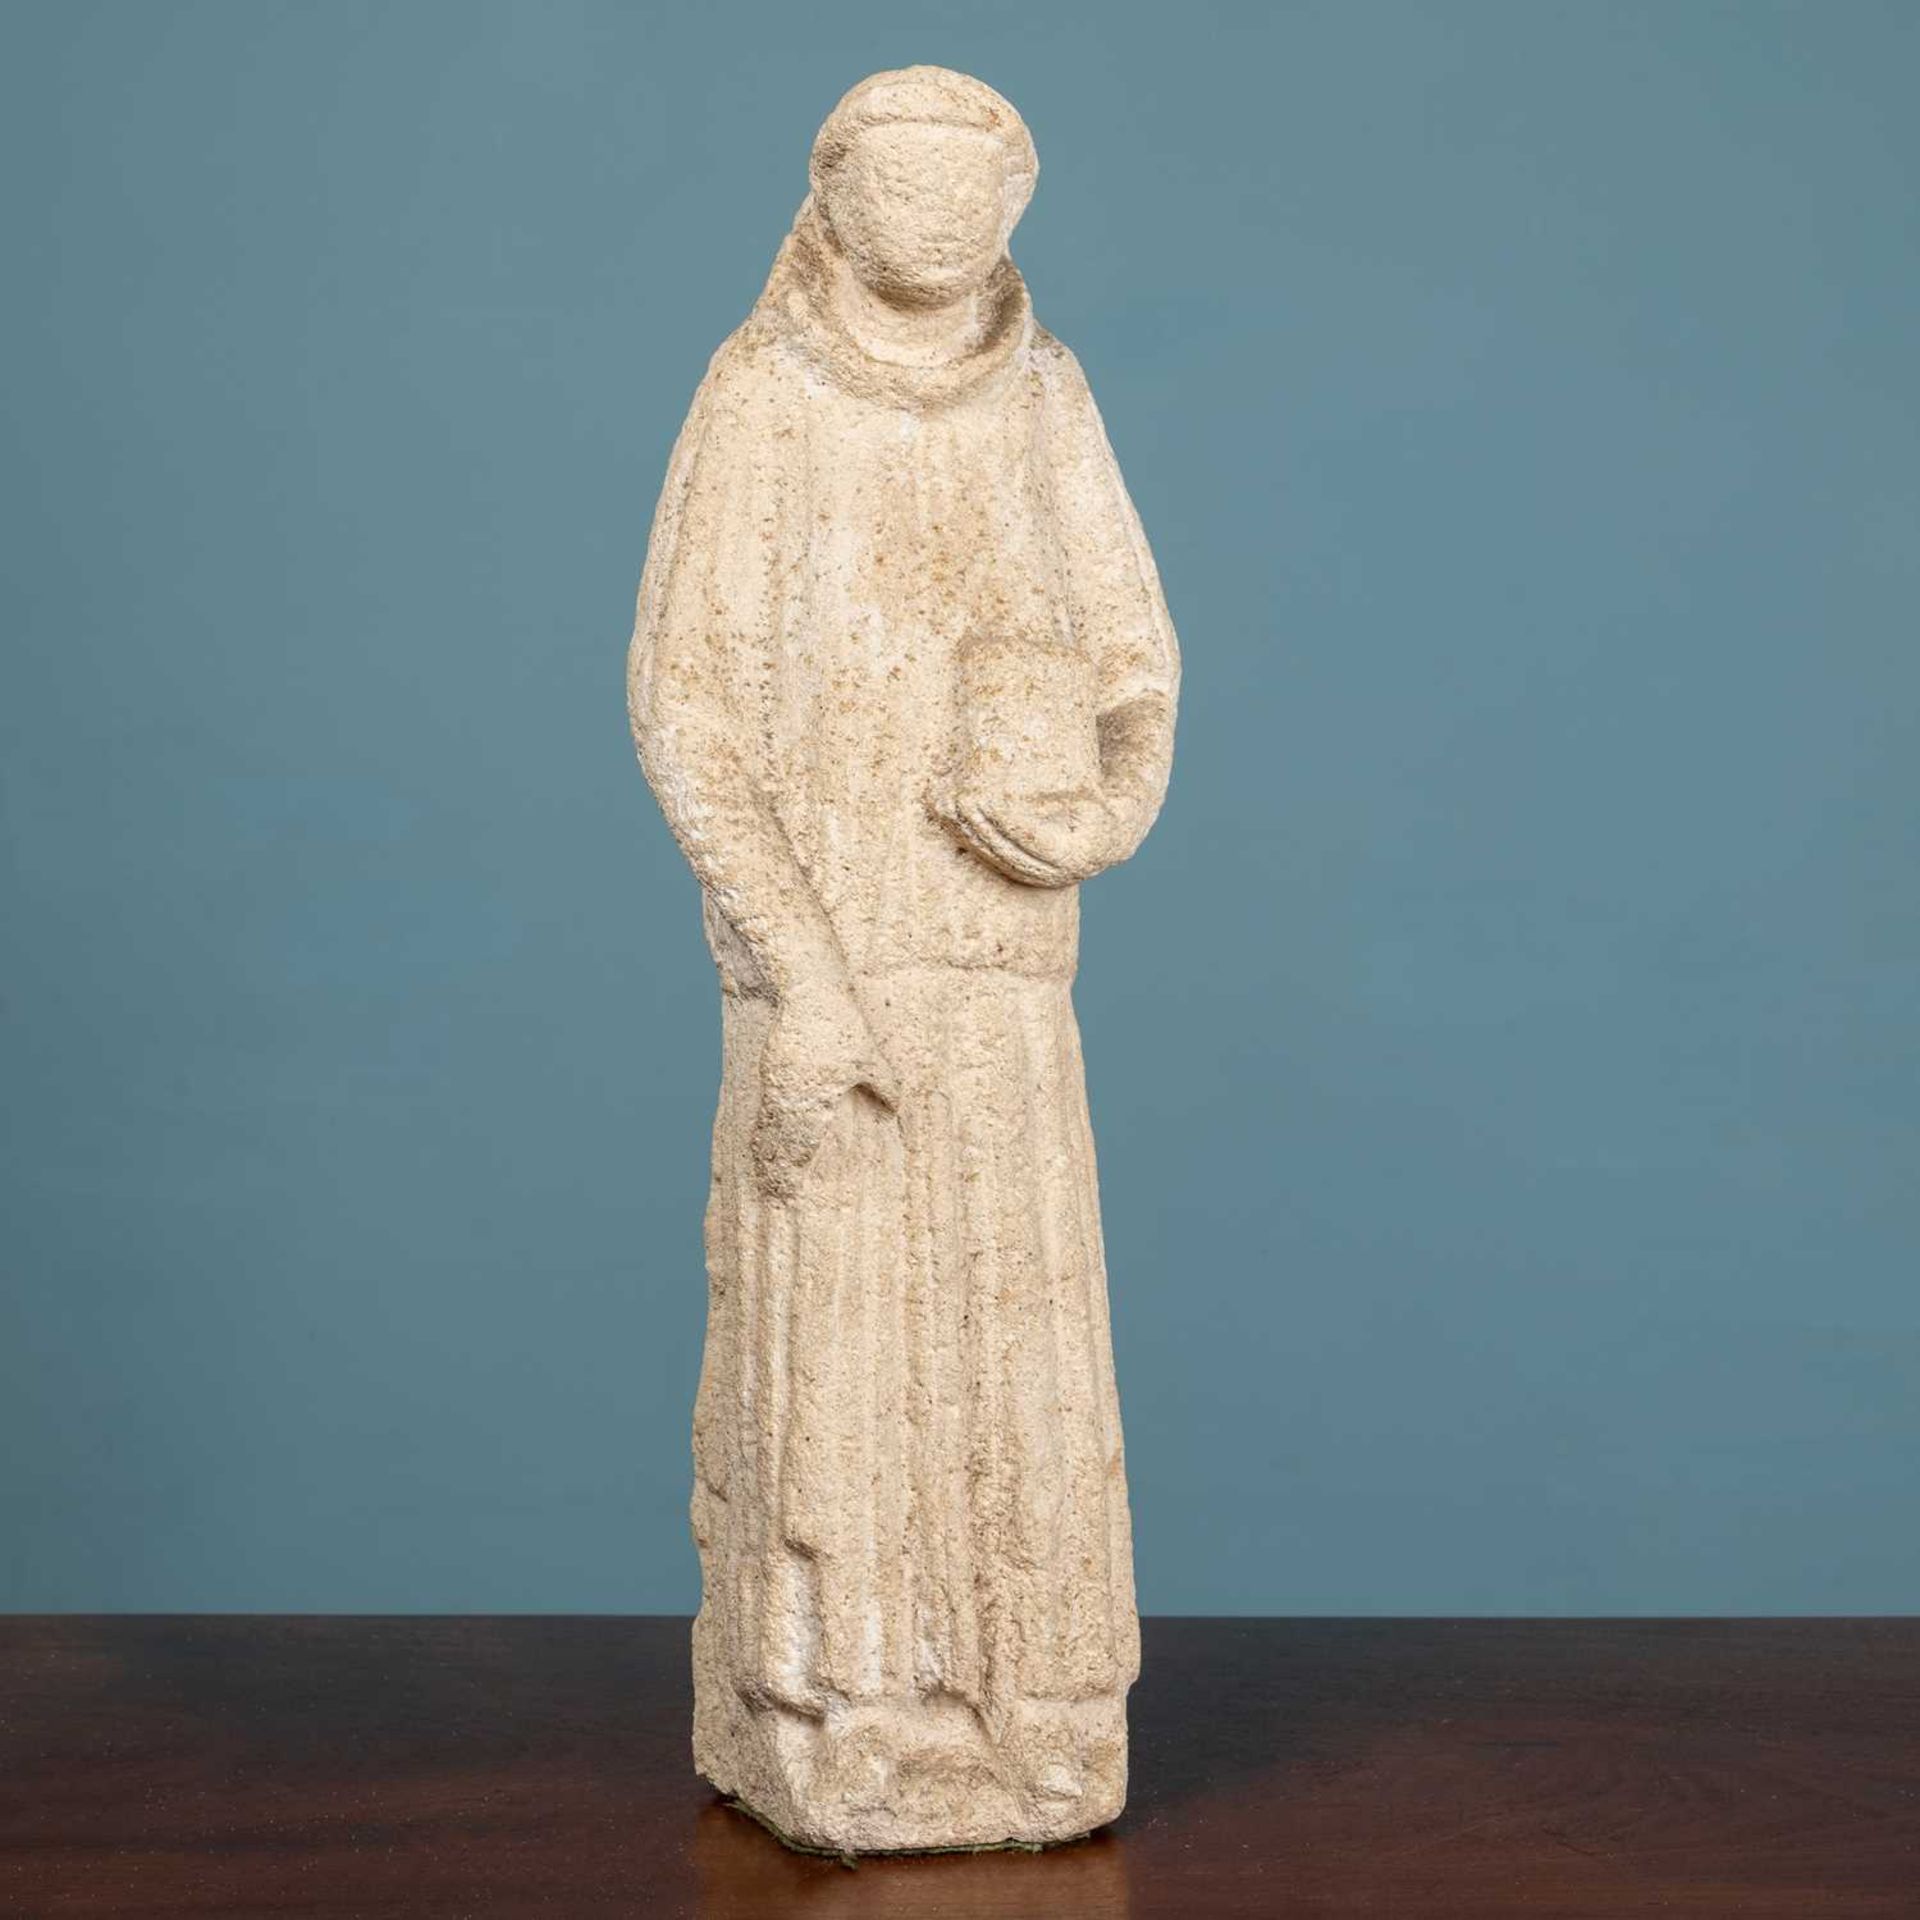 A carved limestone sculpture of a monk